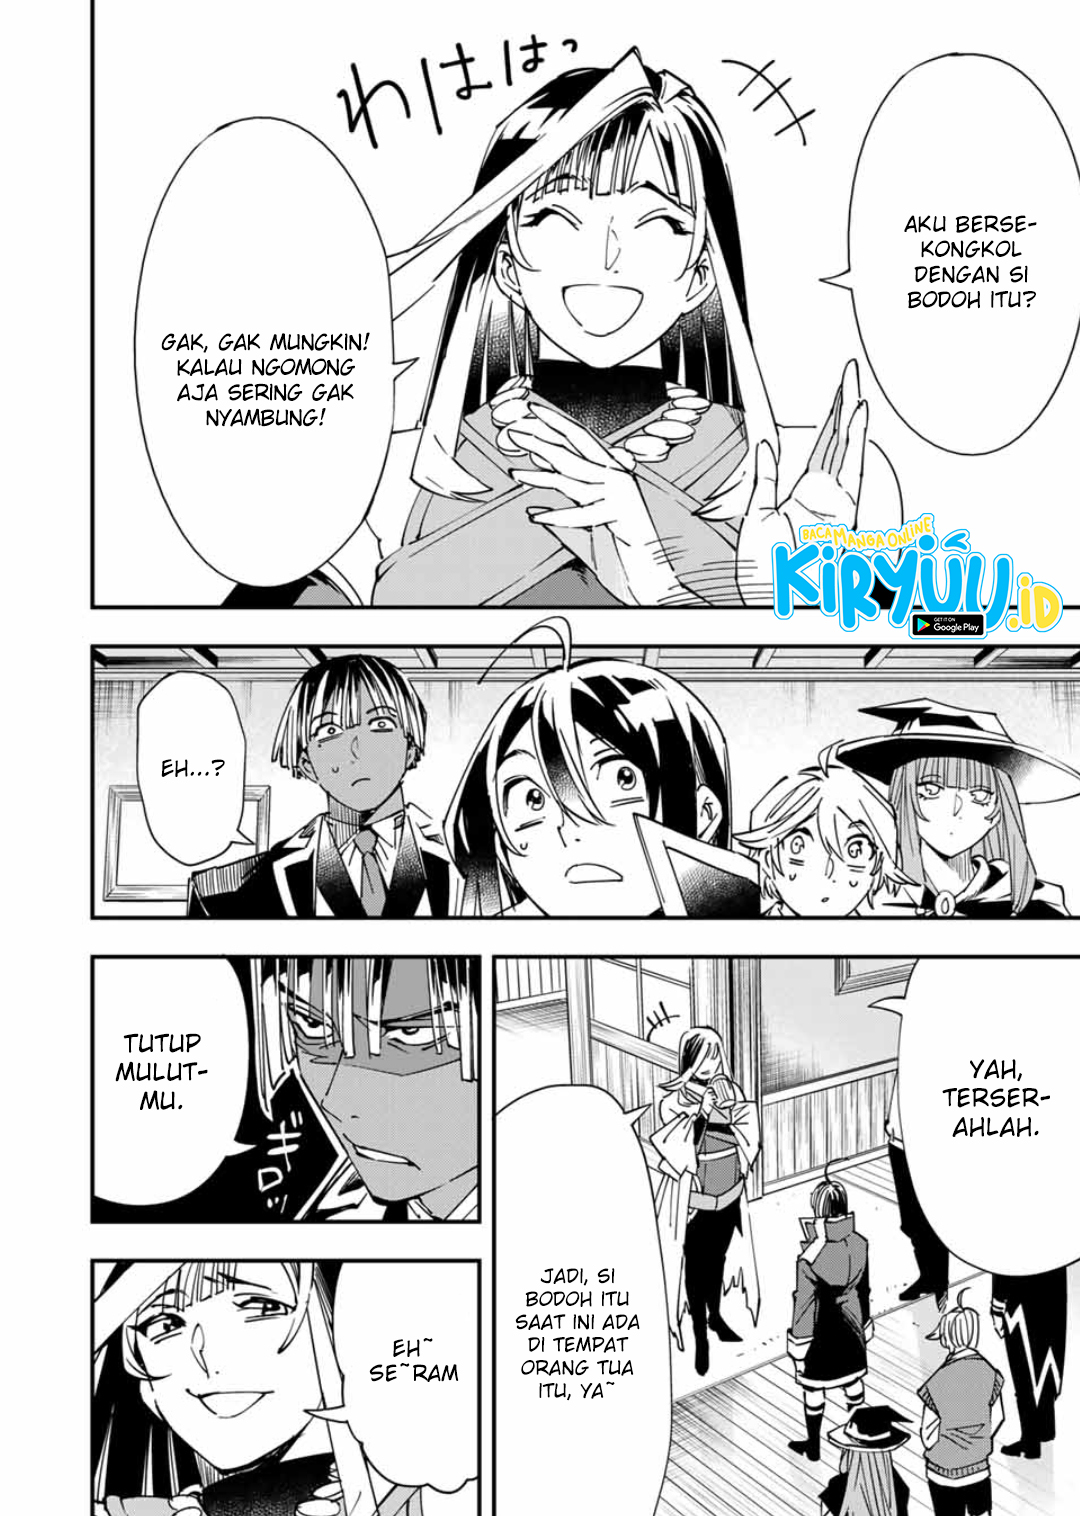 Reincarnated as an Aristocrat with an Appraisal Chapter 43 Bahasa Indonesia